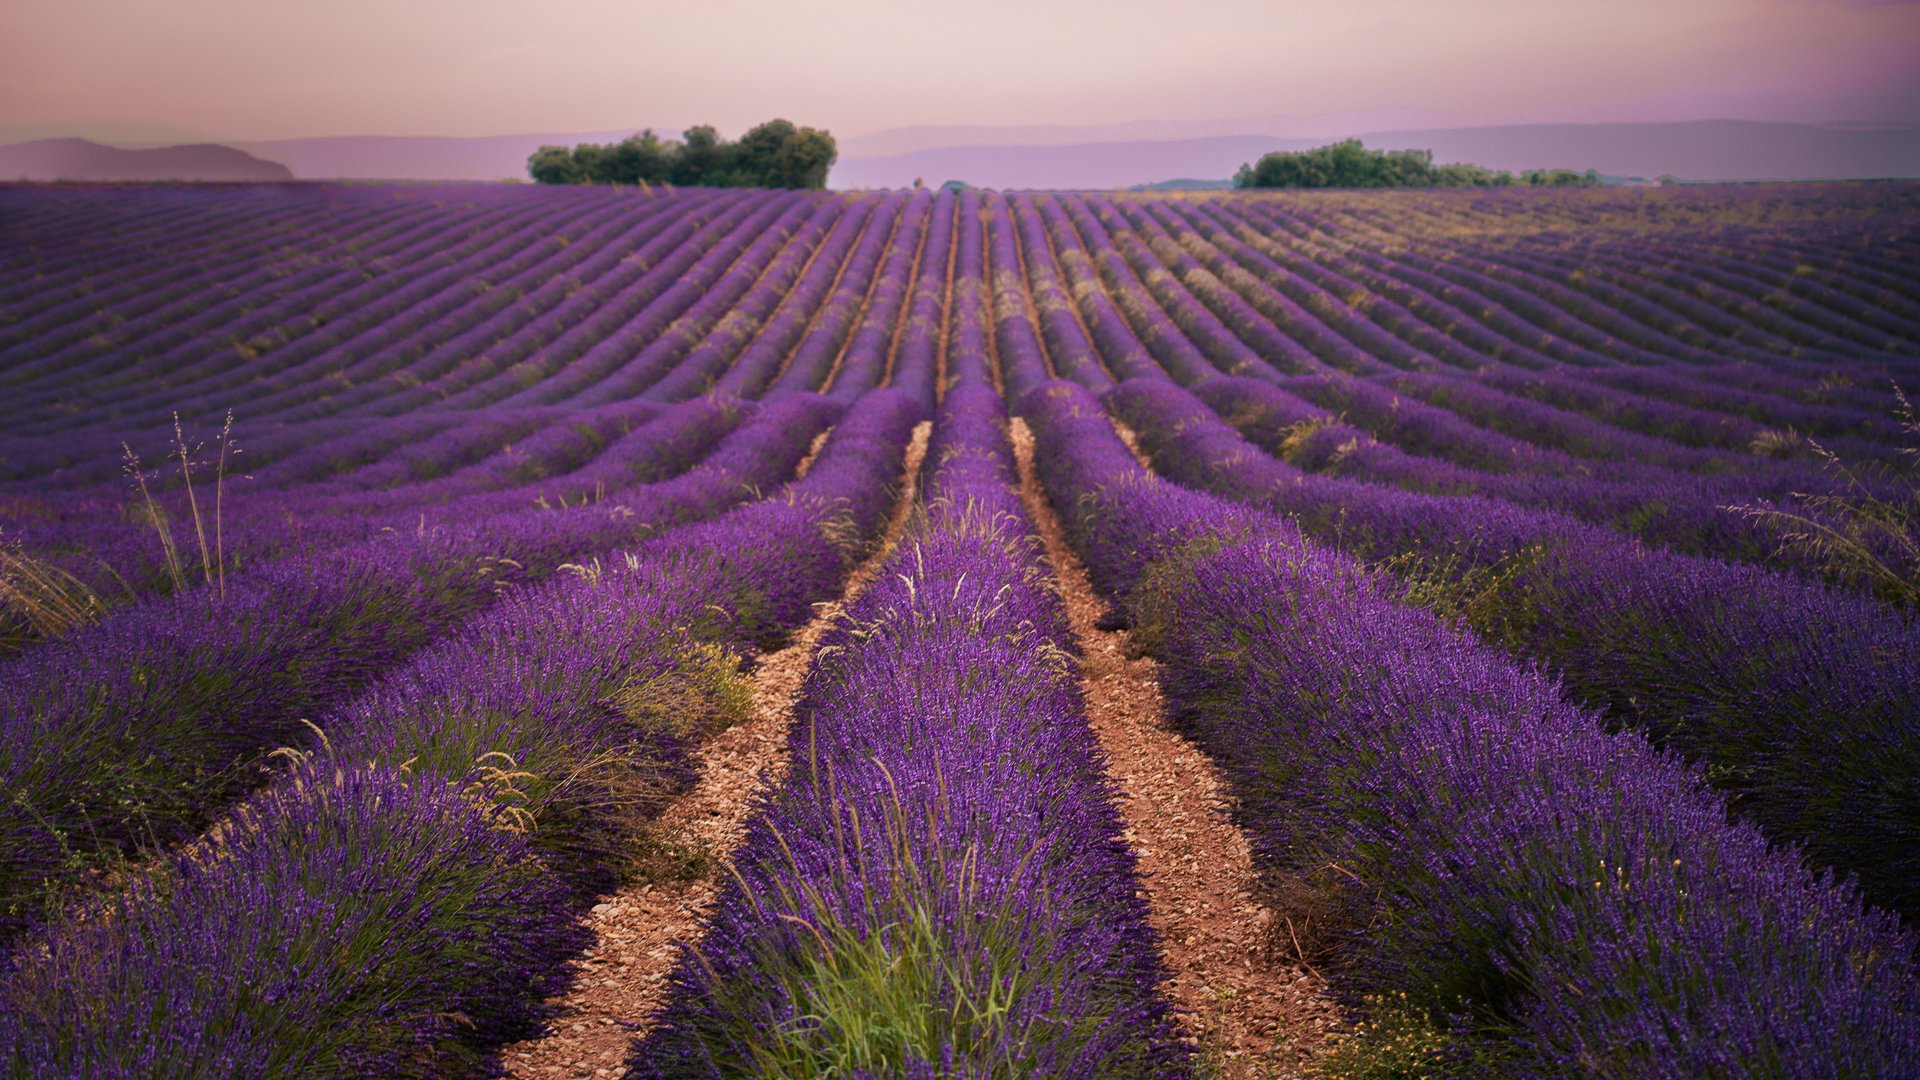 This image shows endless stretches of purple lavender fields for as far as the eye can see. 